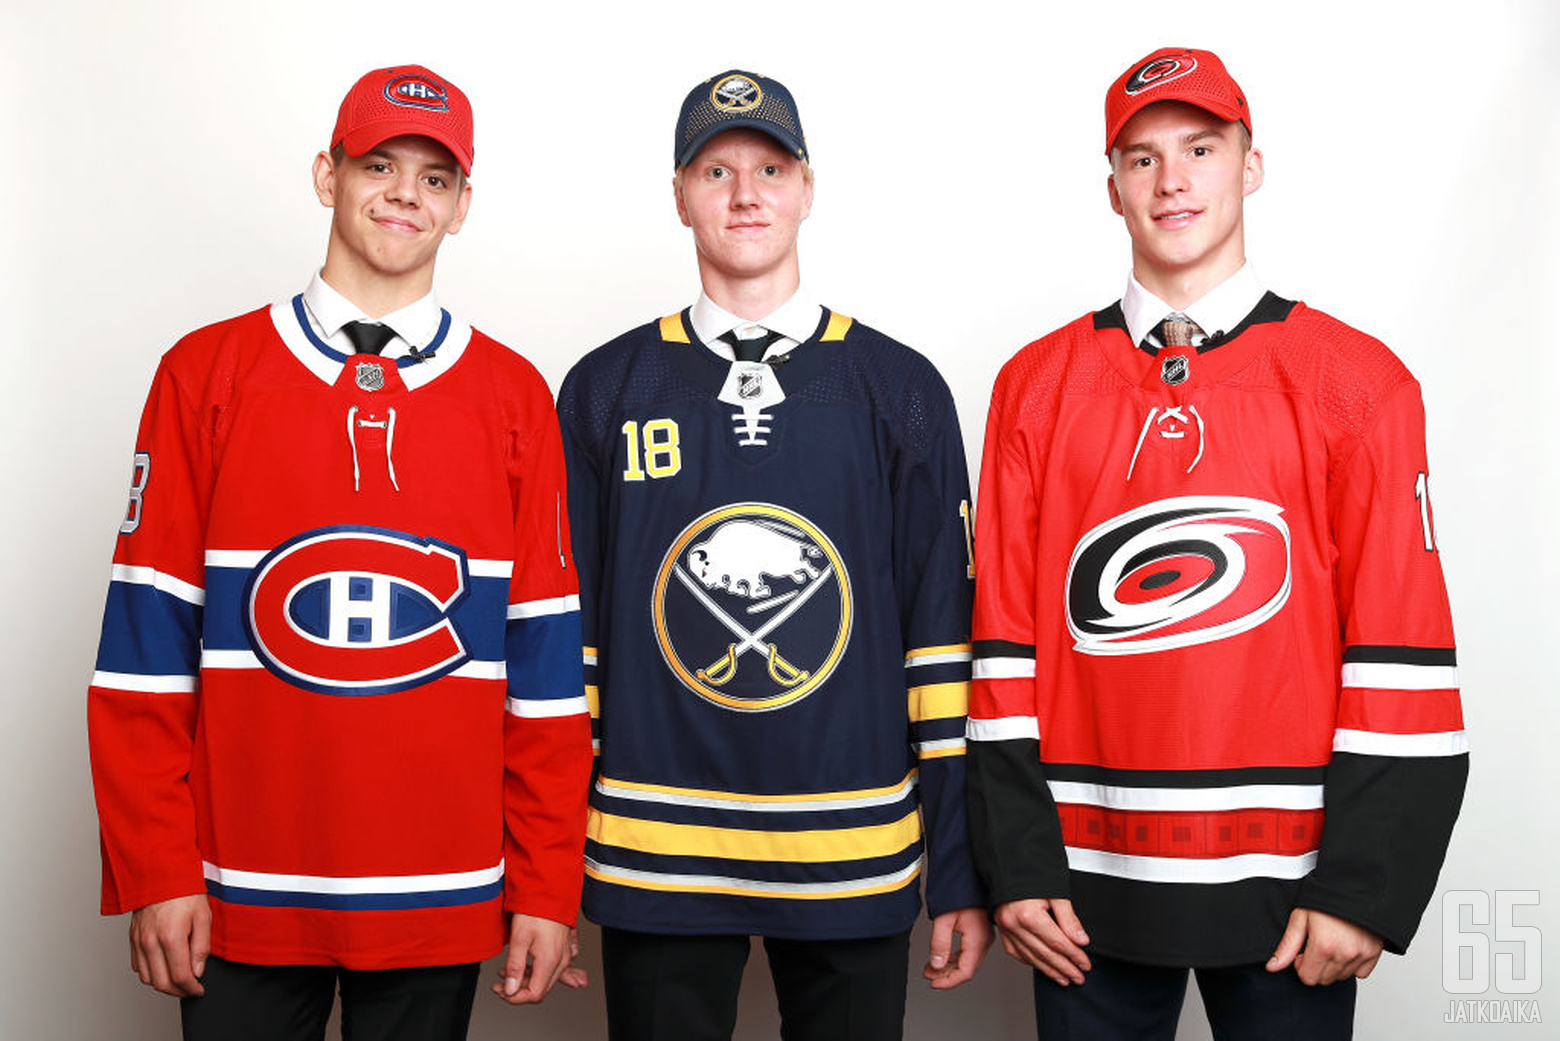 DALLAS, TX - JUNE 22:  (left to right) Jesperi Kotkaniemi, who was selected third overall by the Montreal Canadiens, Rasmus Dahlin, who was selected first overall by the Buffalo Sabres, and Andrei Svechnikov, who was selected second overall by the Carolin